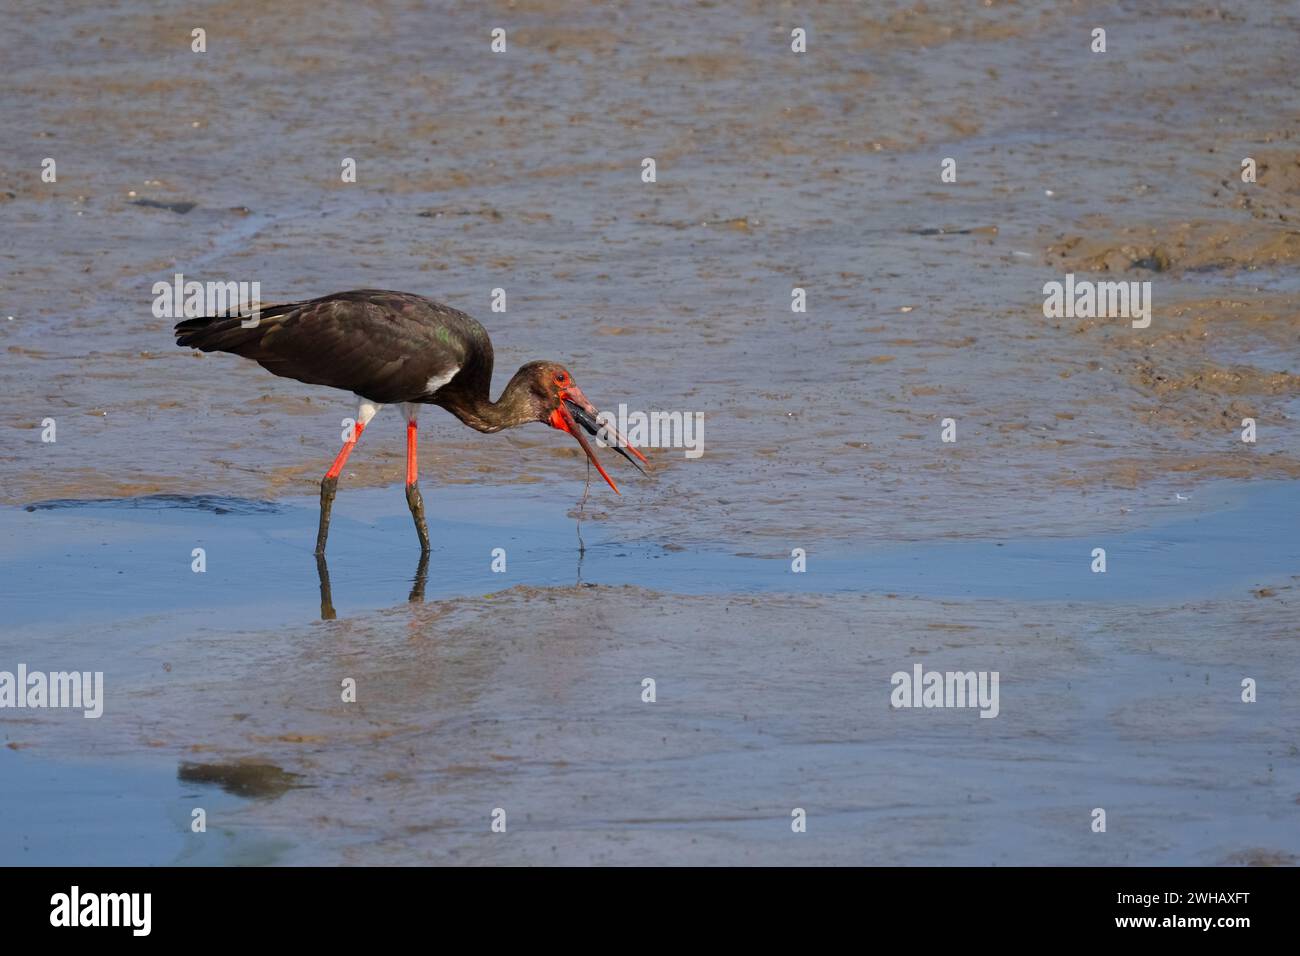 black stork (Ciconia nigra) swallowing a fish Photographed in Israel This wader inhabits wetland areas, feeding on fish, small animals and insects. A Stock Photo